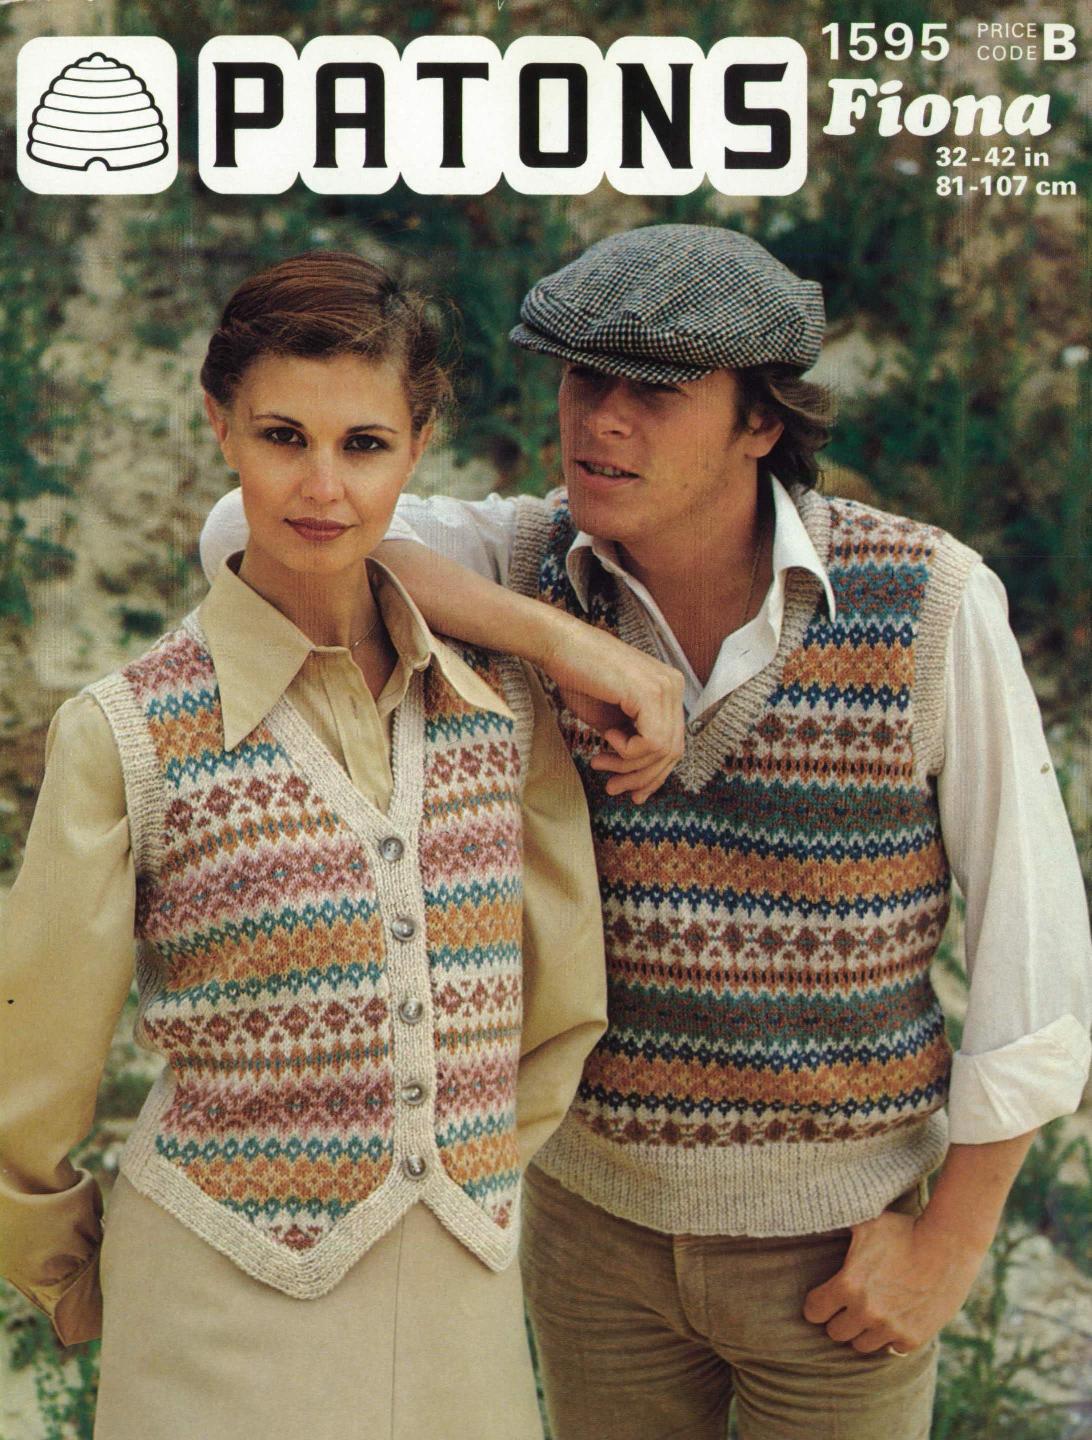 Cover of Patons leaflet showing lady wearing geometric pattern Fair Isle waistcoat and man wearing a sleeveless sweater fersion of the same pattern in different colours.